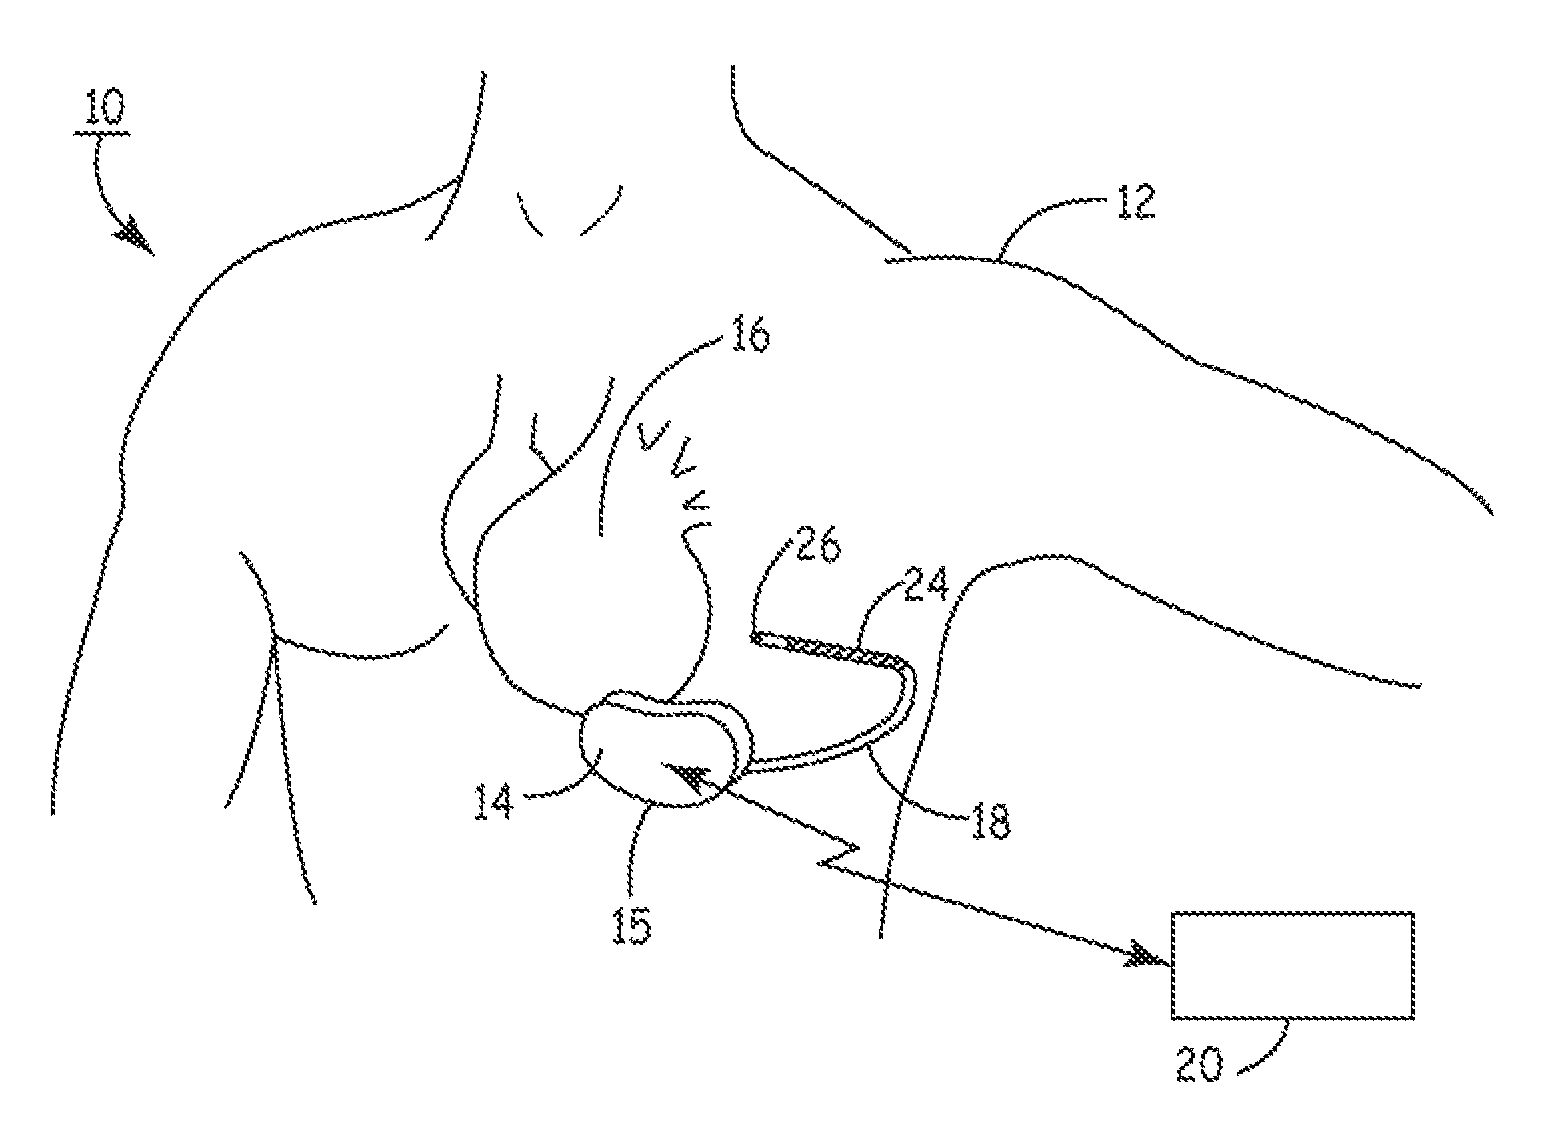 Method and apparatus for detecting arrhythmias in a subcutaneous medical device